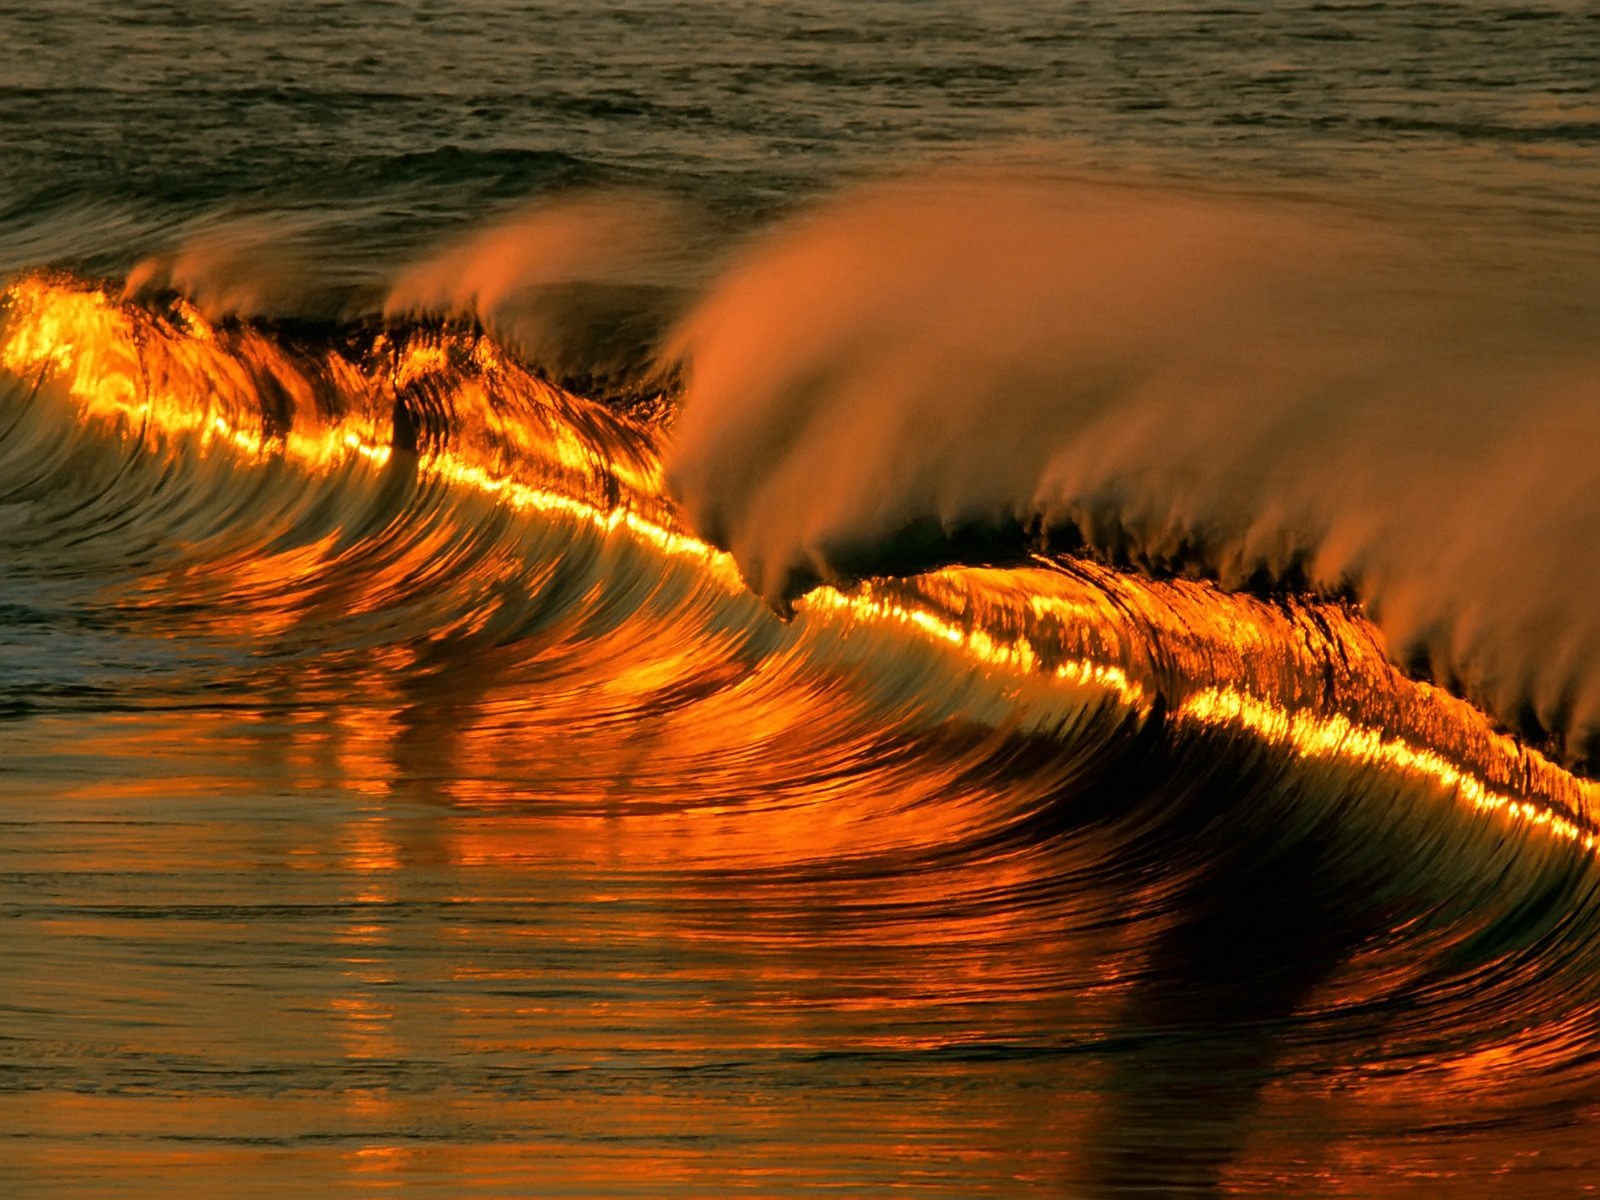 Golden Wave Wallpaper Other Nature Wallpapers in jpg format for free ...